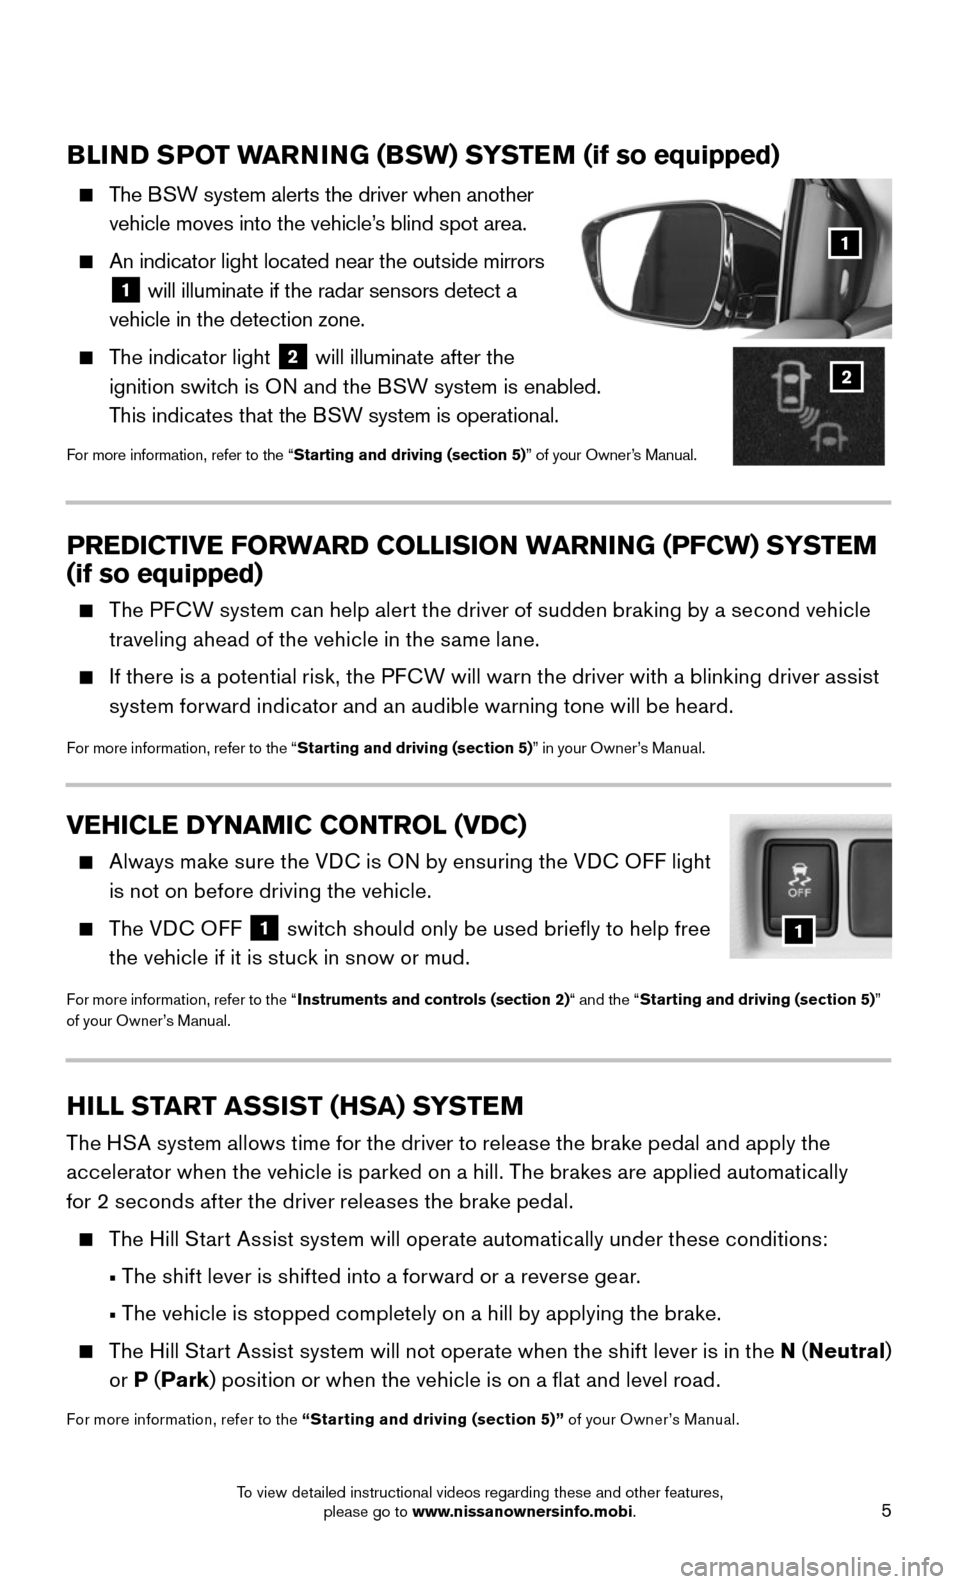 NISSAN MURANO 2015 3.G Quick Reference Guide 5
BLIND SPOT WARNING (BSW) SYSTEM (if so equipped)
    The BSW system alerts the driver when another 
vehicle moves into the vehicle’s blind spot area.
    An indicator light located near the outsid